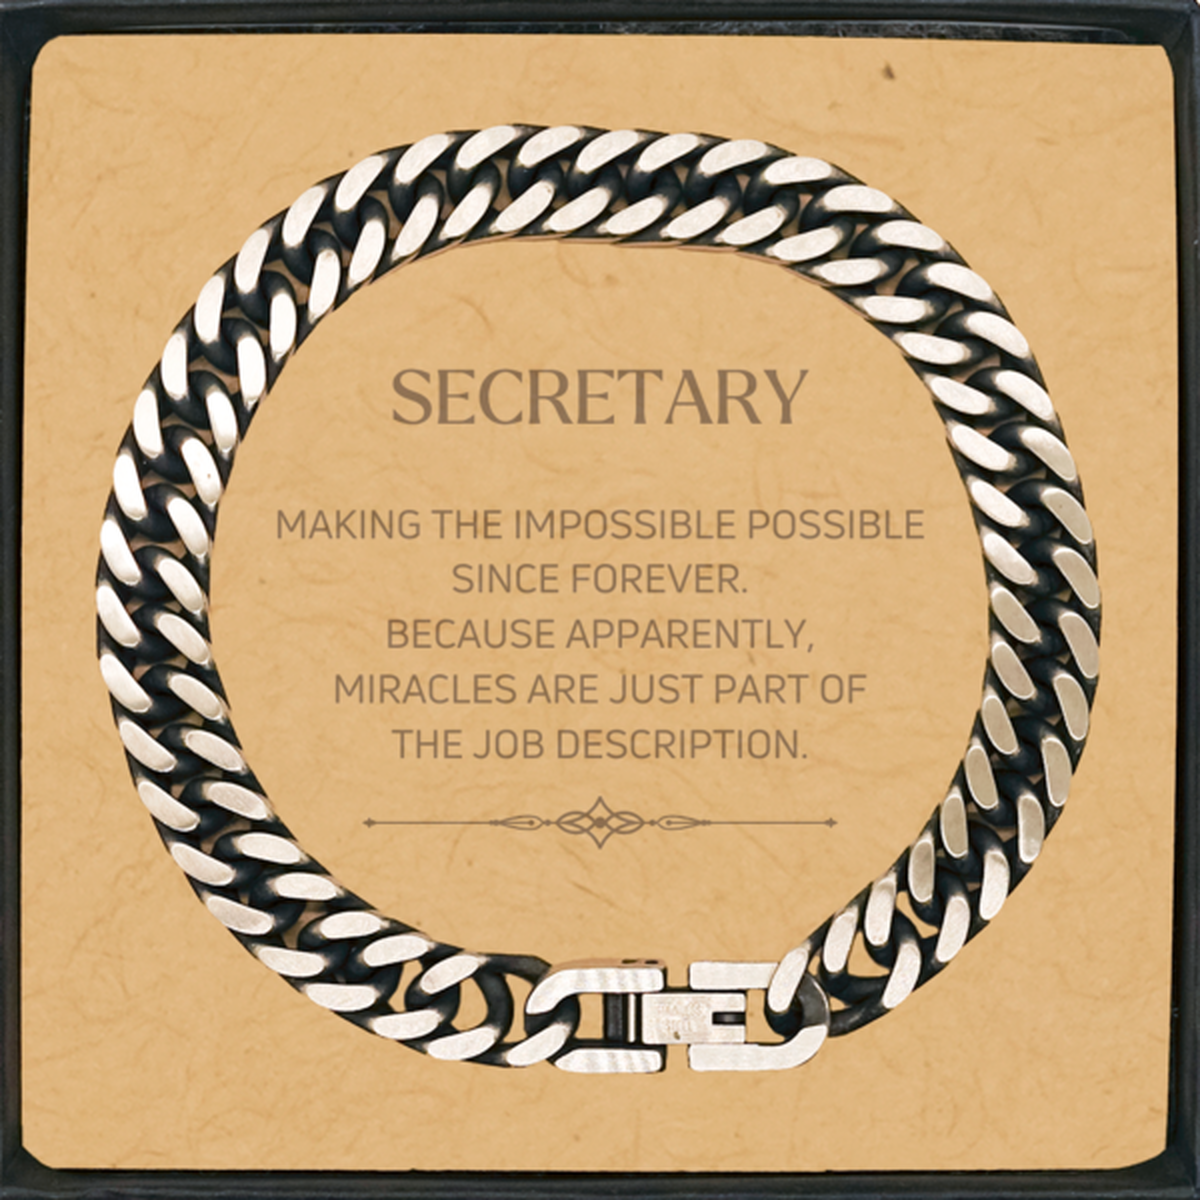 Funny Secretary Gifts, Miracles are just part of the job description, Inspirational Birthday Cuban Link Chain Bracelet For Secretary, Men, Women, Coworkers, Friends, Boss